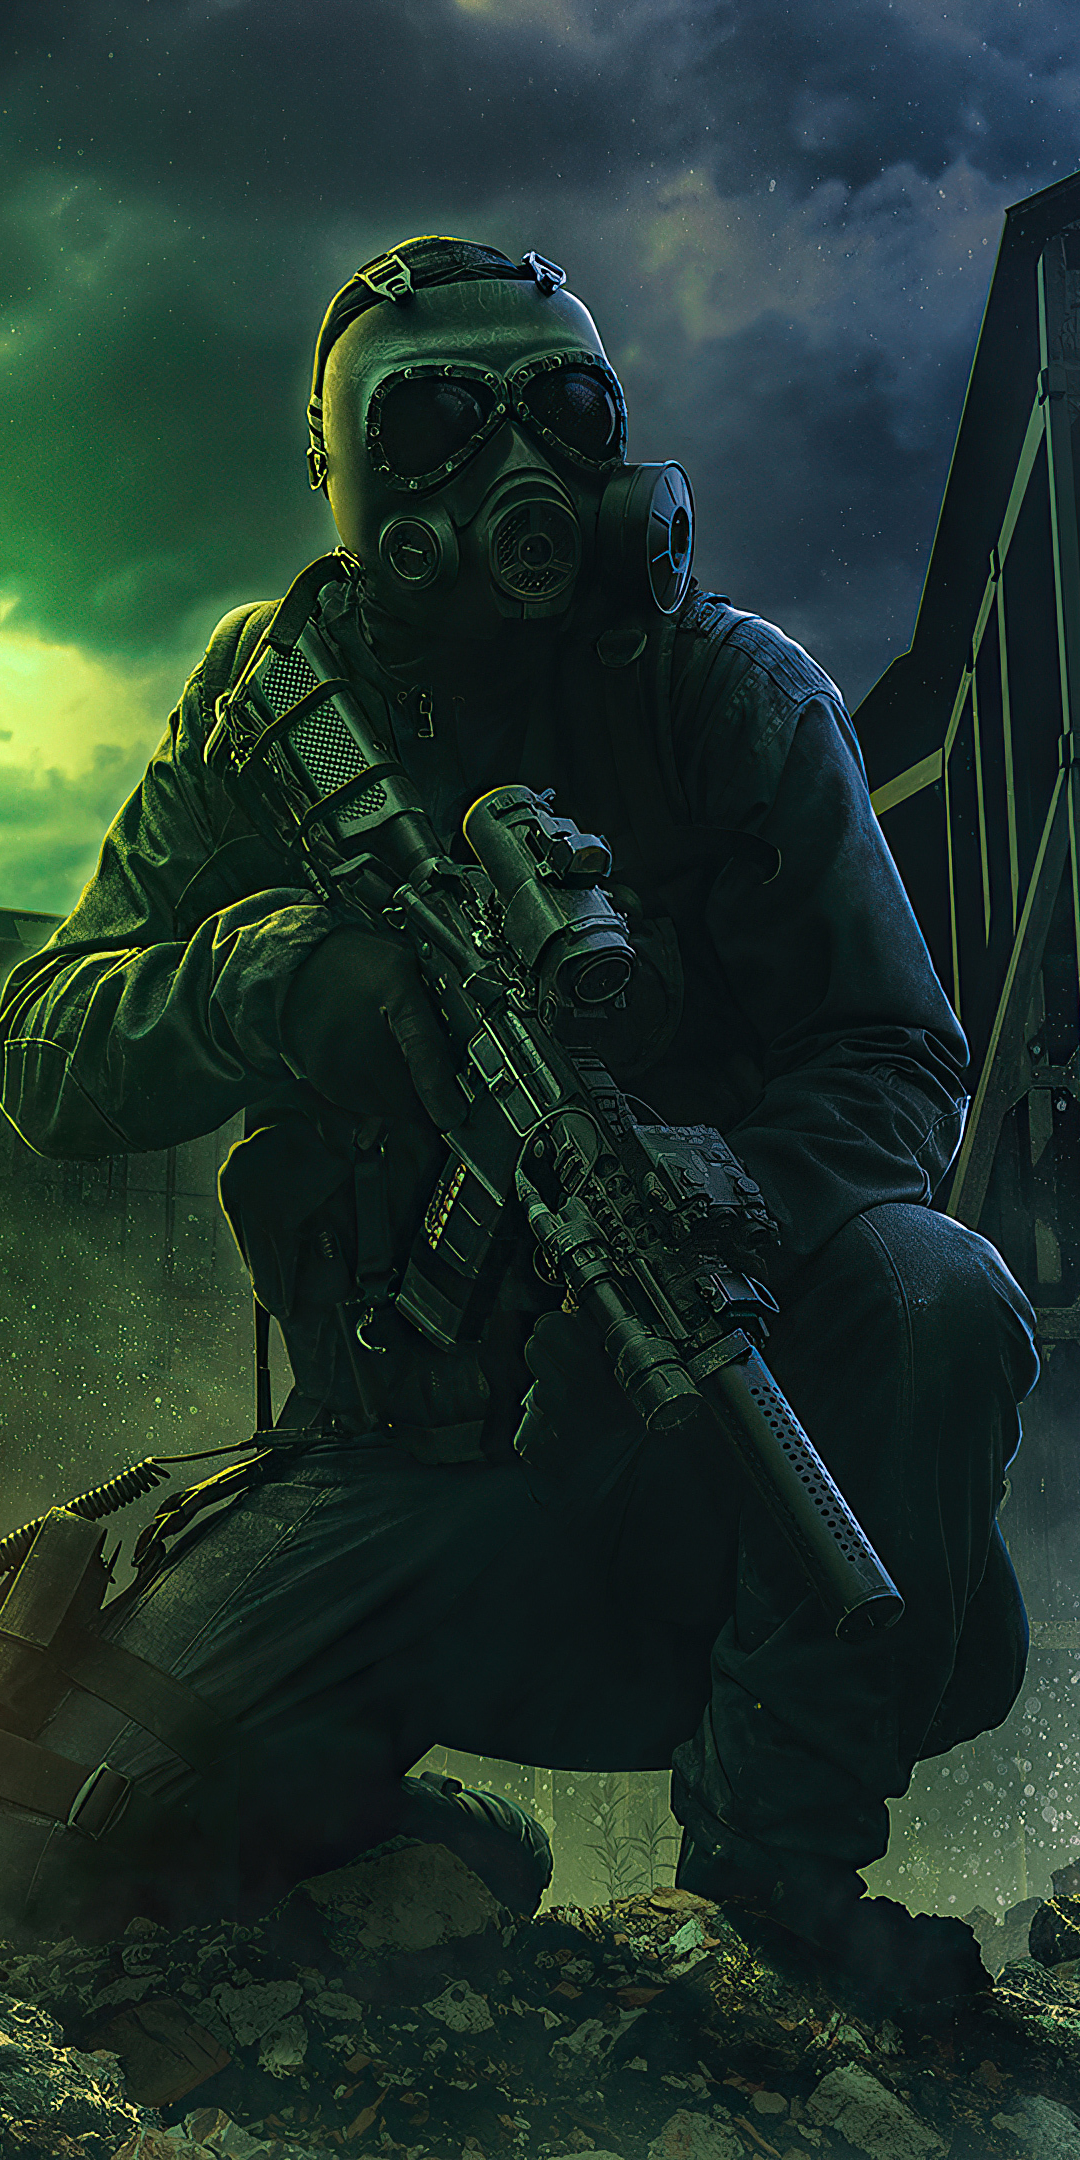 Download 1080x2160 wallpaper men with gun, soldier of destruction, video game, artwork, honor 7x, honor 9 lite, honor view HD image, background, 25997